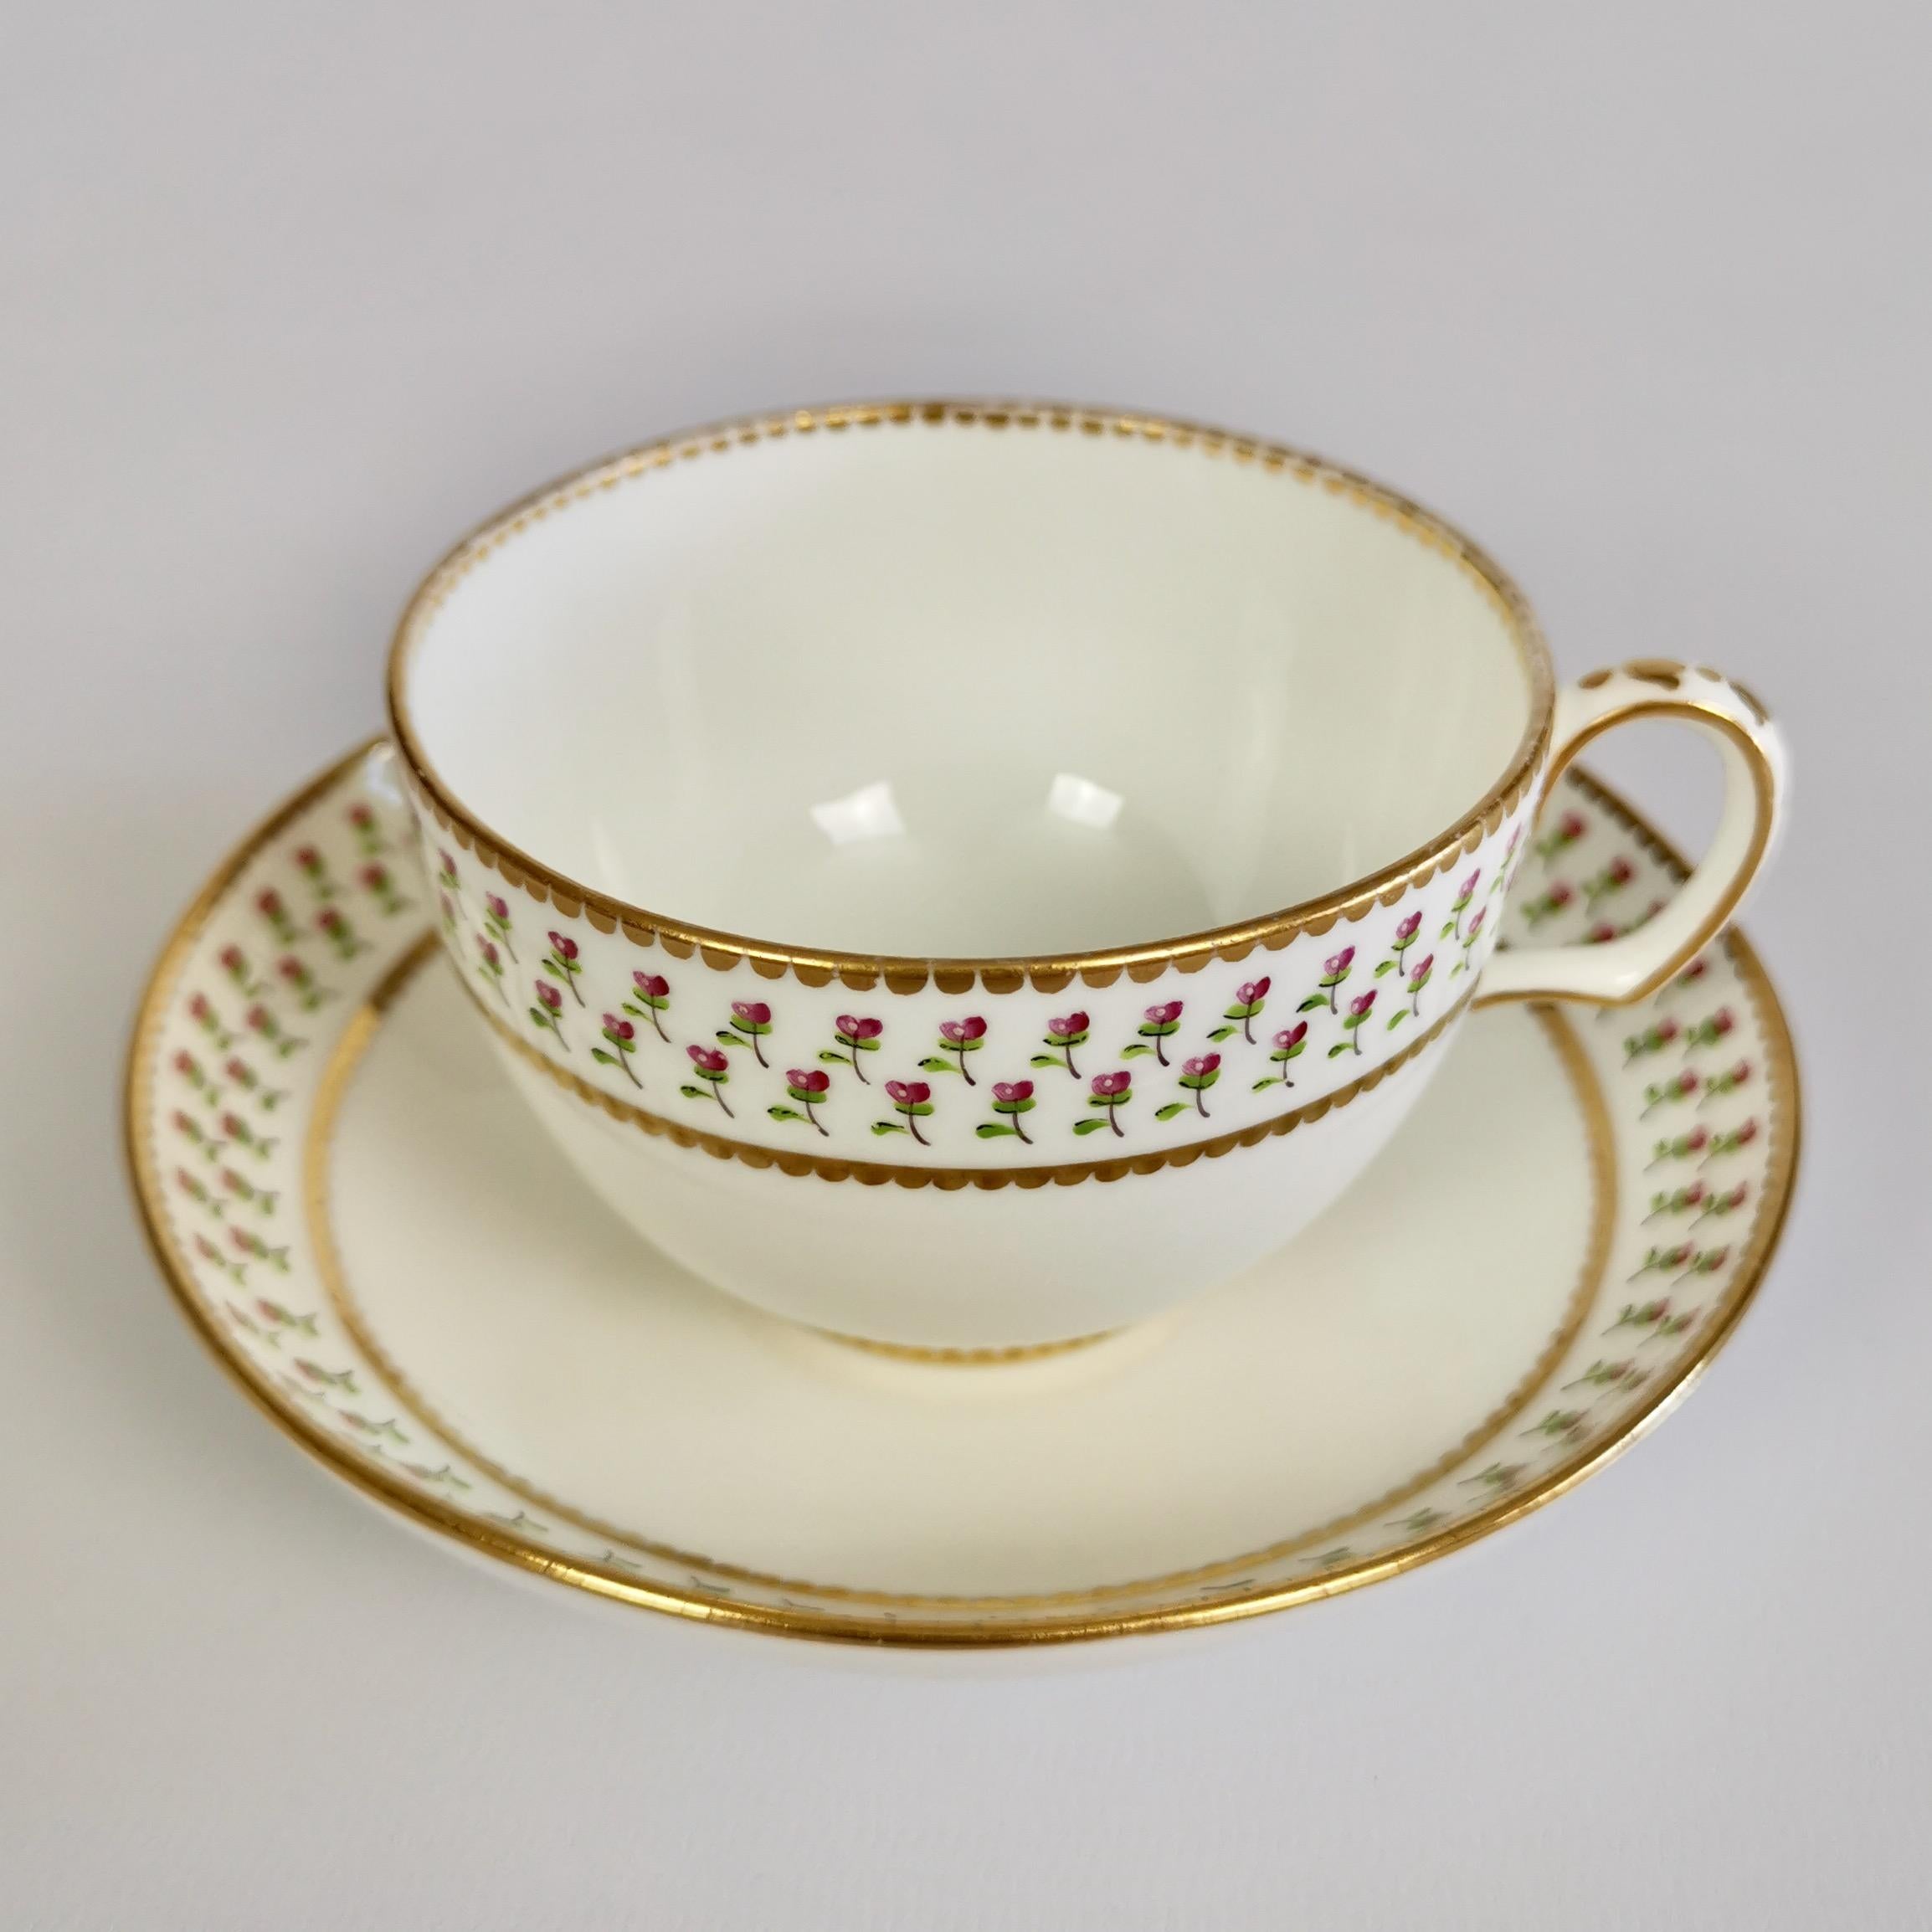 Victorian Derby King Street Porcelain Teacup Trio, White with Tiny Roses, 1848-1862